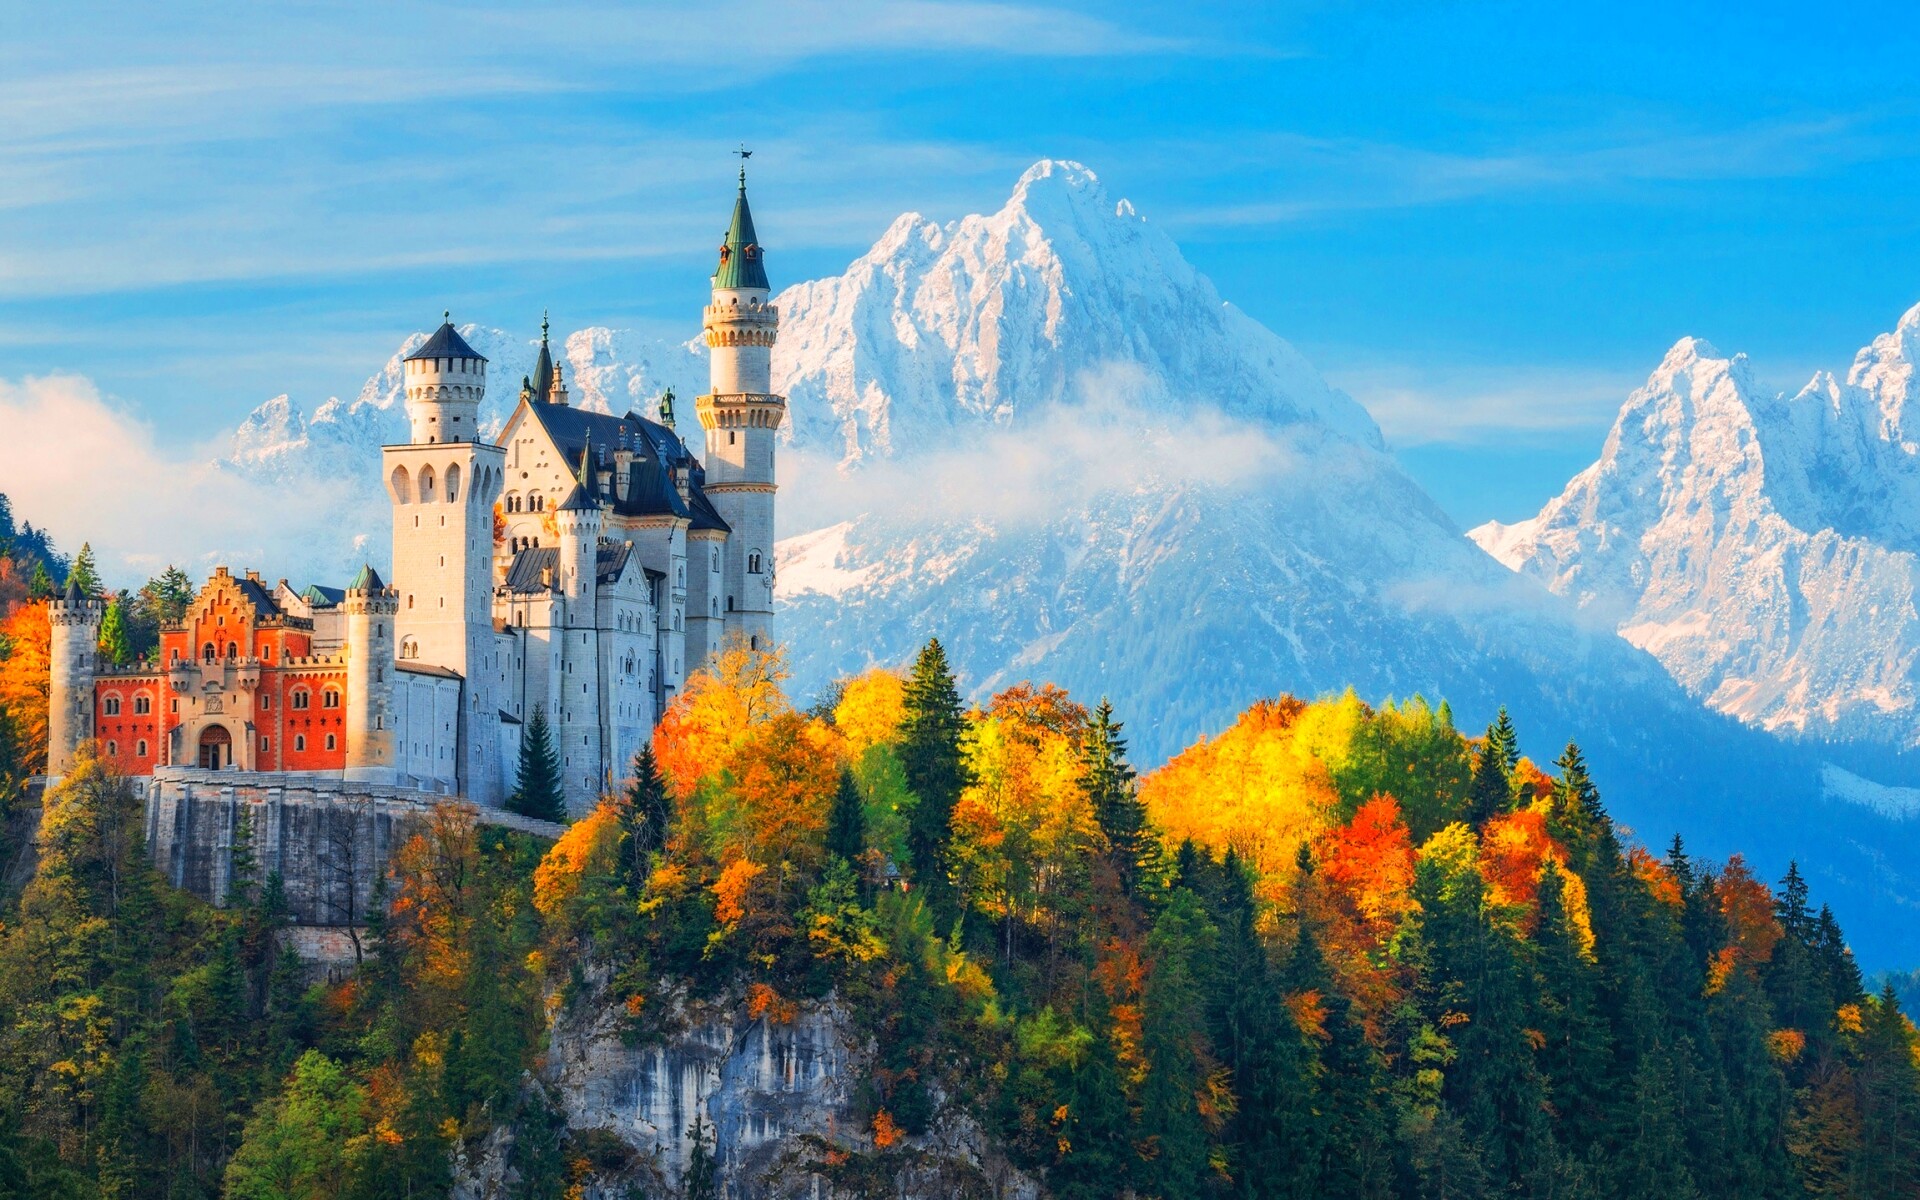 Neuschwanstein Castle: A 19th-century, hilltop palace designed in a Romanesque Revival style. 1920x1200 HD Wallpaper.